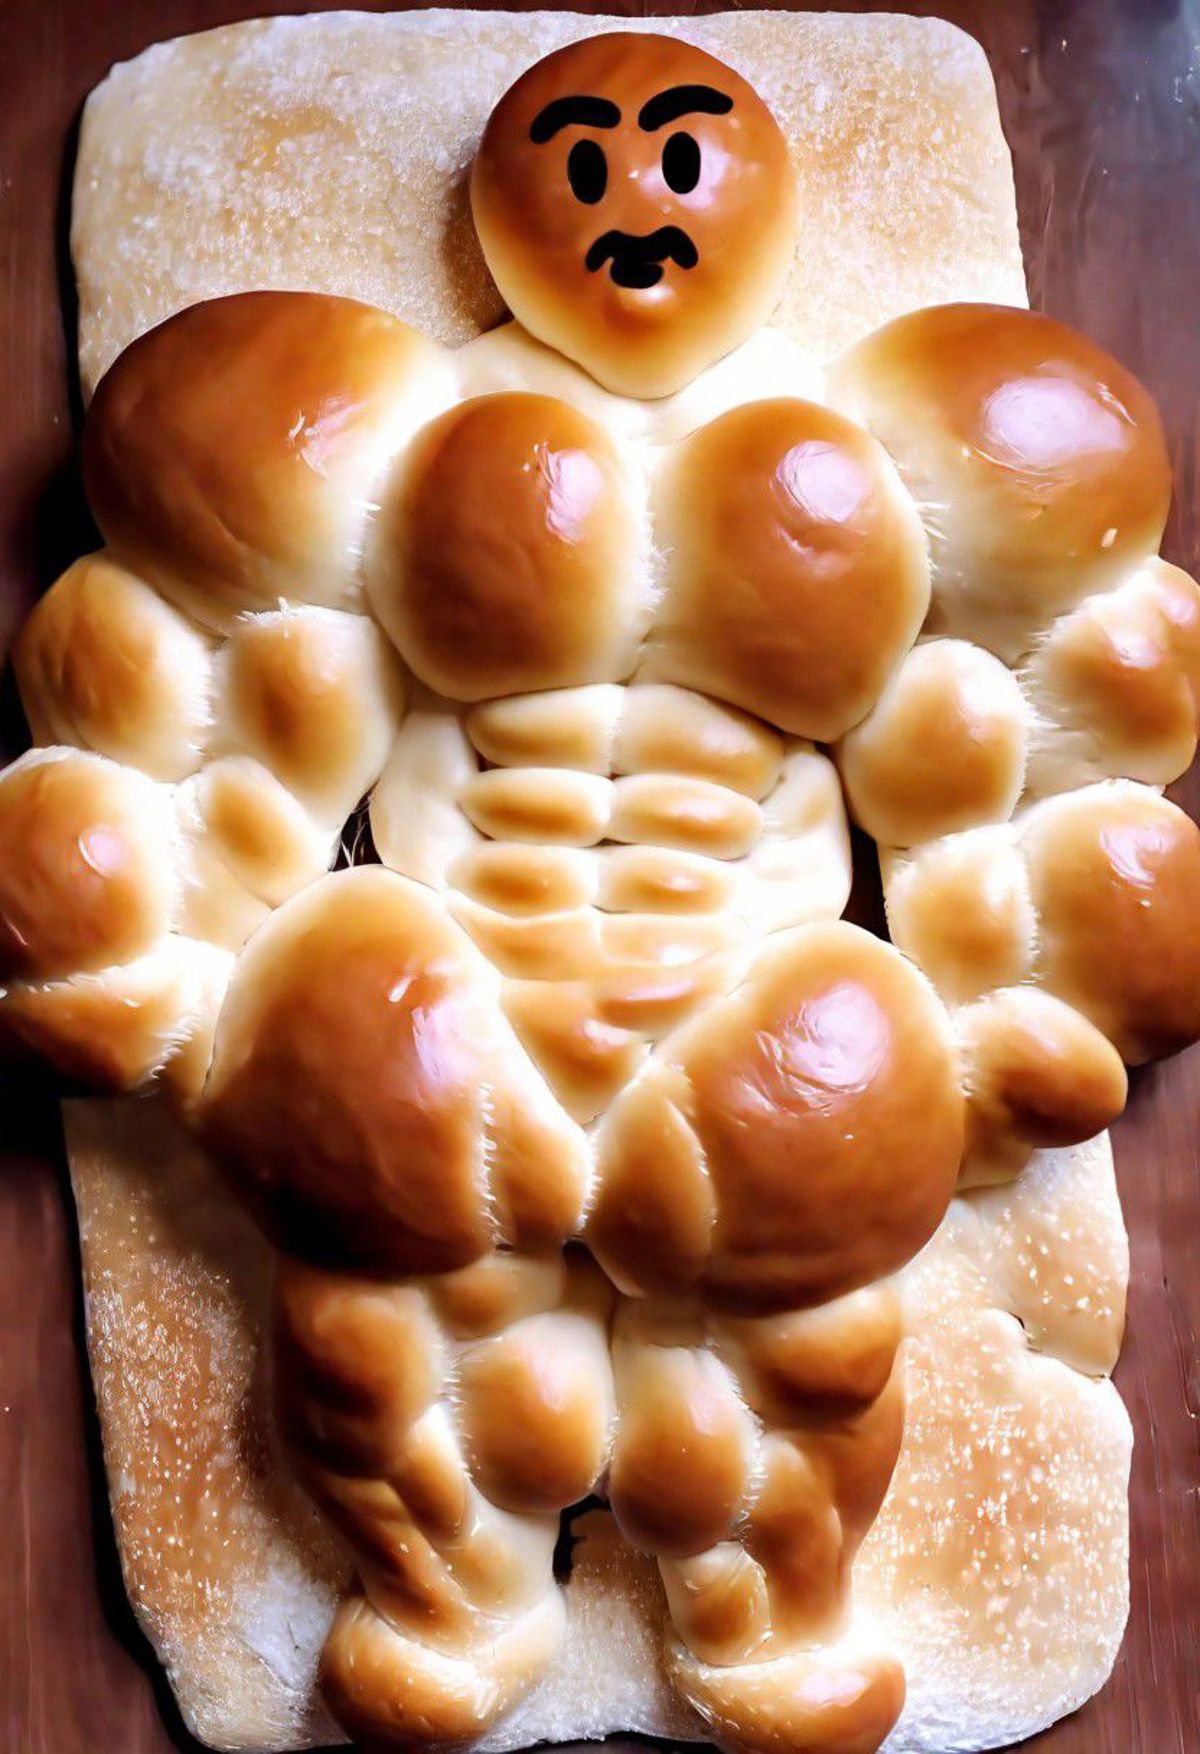 Muscular Bread - SDXL- PAseer image by Clebexxception